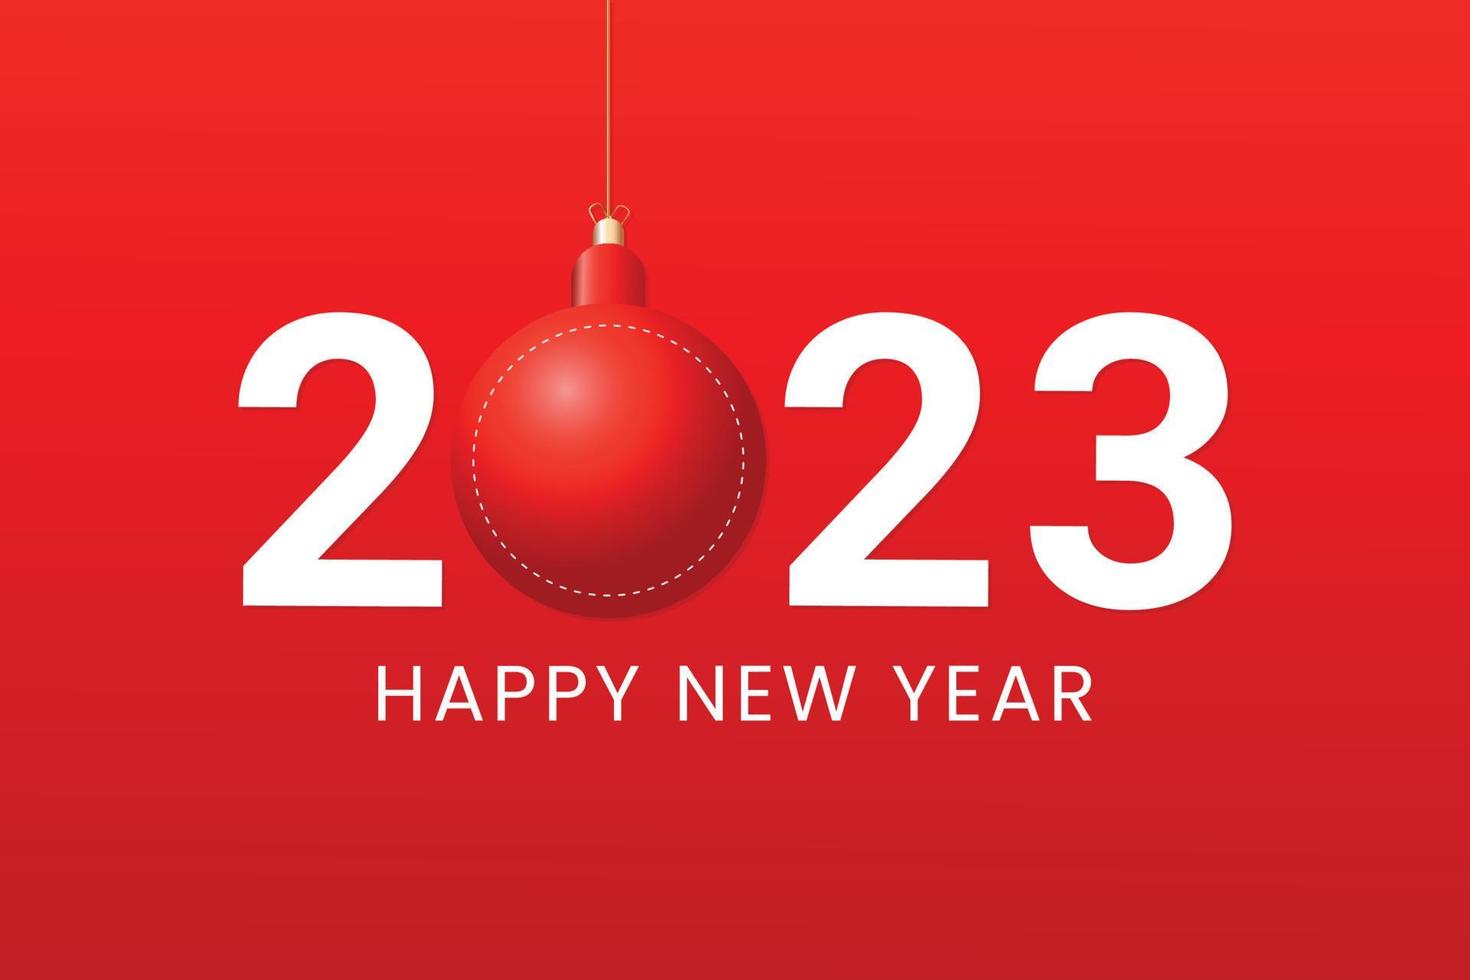 Happy New Year 2023 greeting card background, with red christmas ball vector